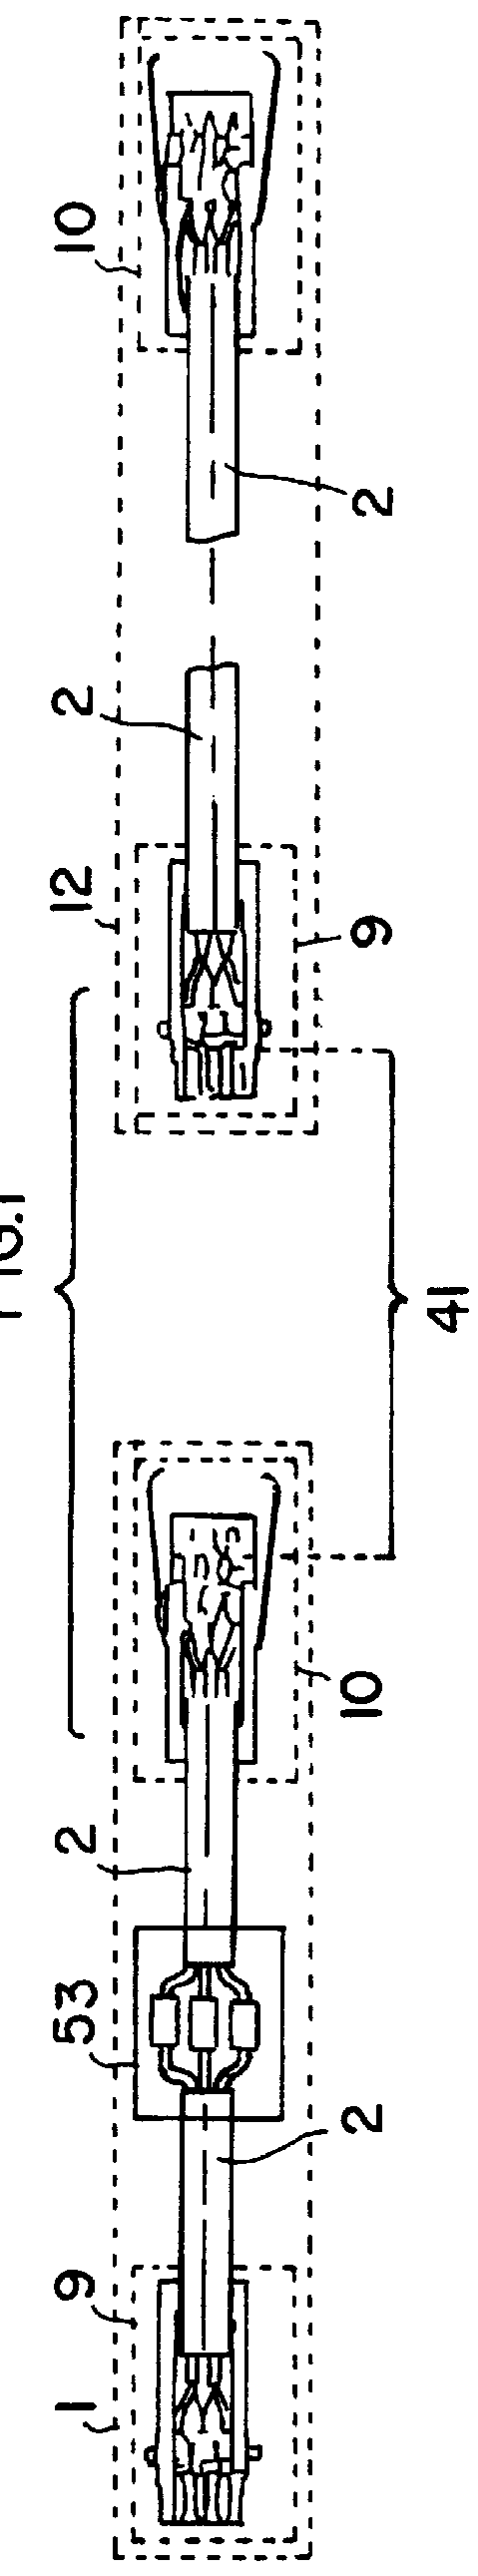 Interconnect system for heating conductors in an aircraft